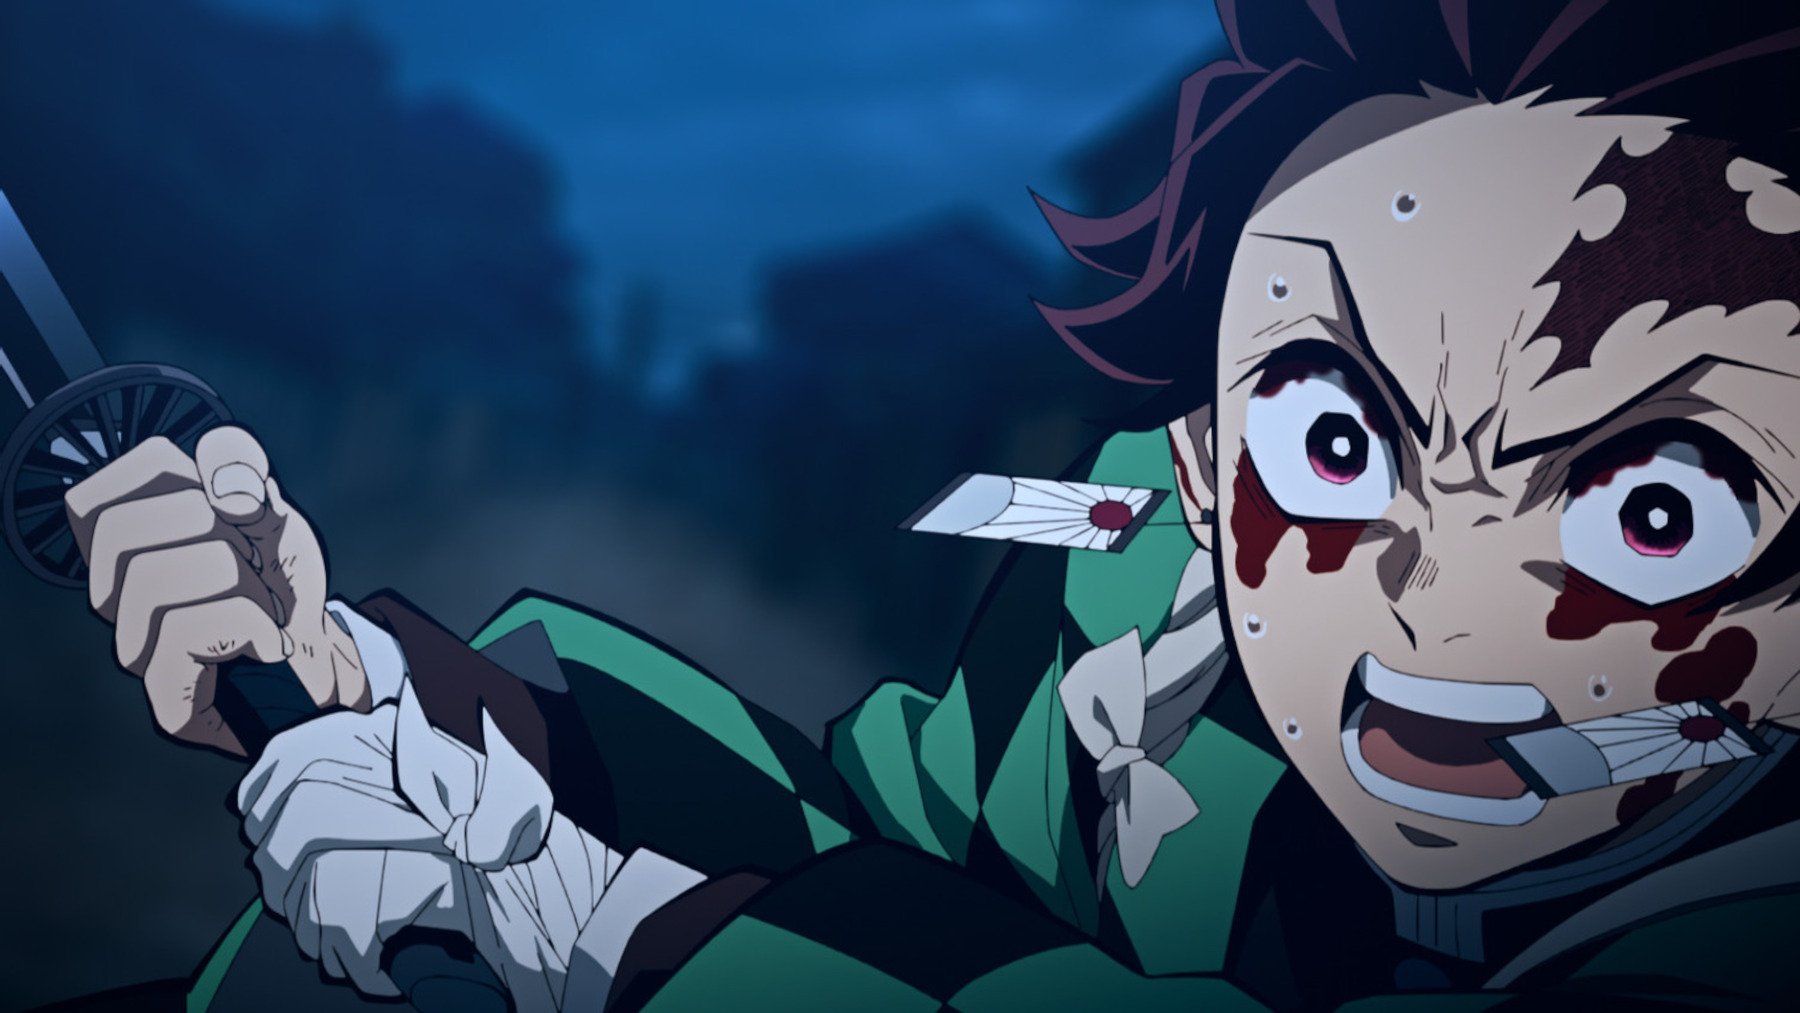 Tanjiro in 'Demon Slayer' Season 2's Entertainment District Arc. He's swinging his sword and covered in blood.